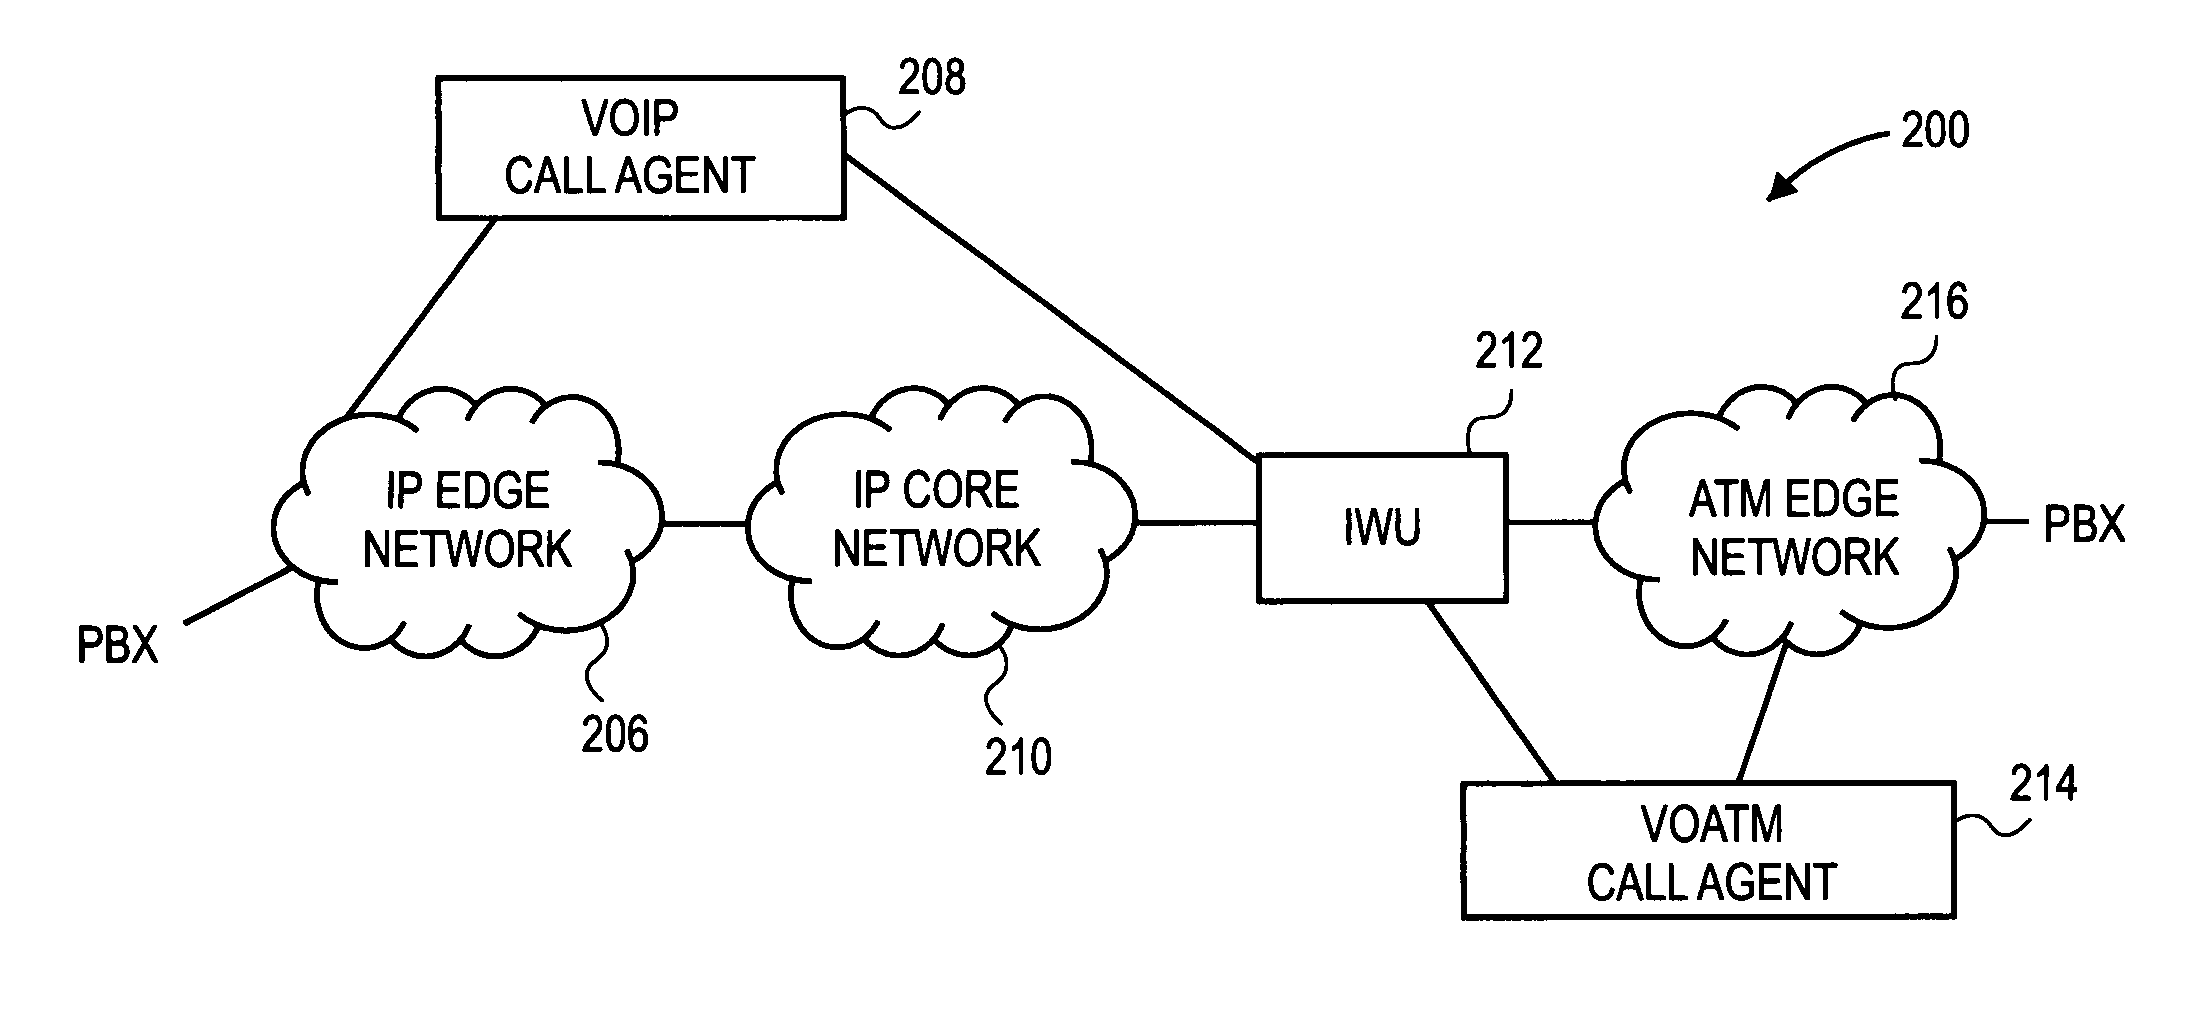 Interworking of packet-based voice technologies using virtual TDM trunks